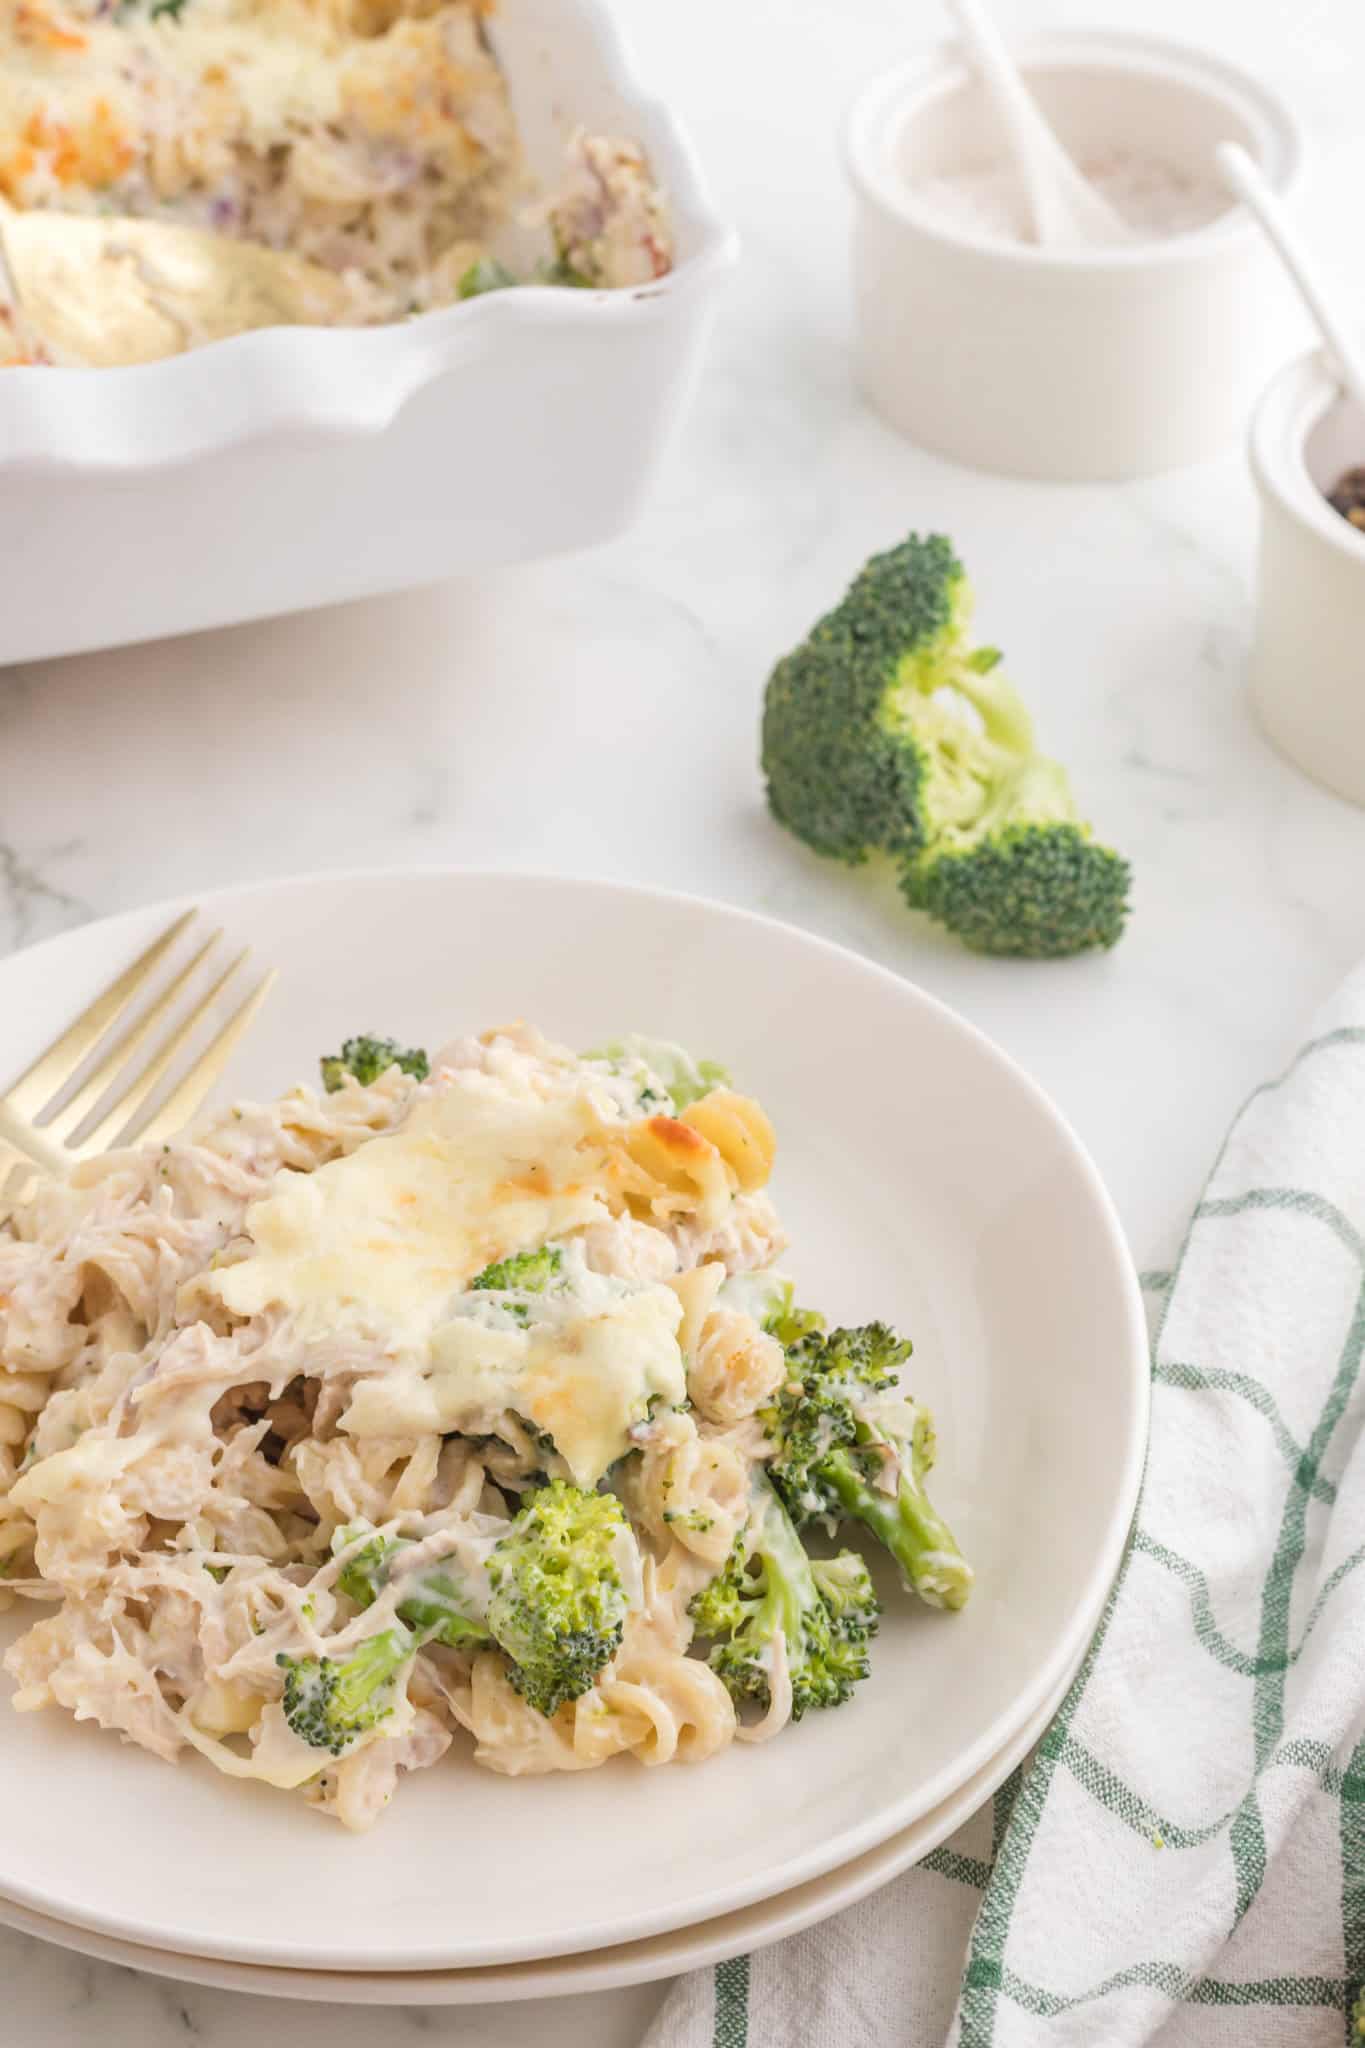 Chicken Broccoli Casserole is a hearty casserole recipe loaded with rotini pasta, shredded chicken and broccoli florets all baked in a creamy sauce and topped with cheddar cheese.